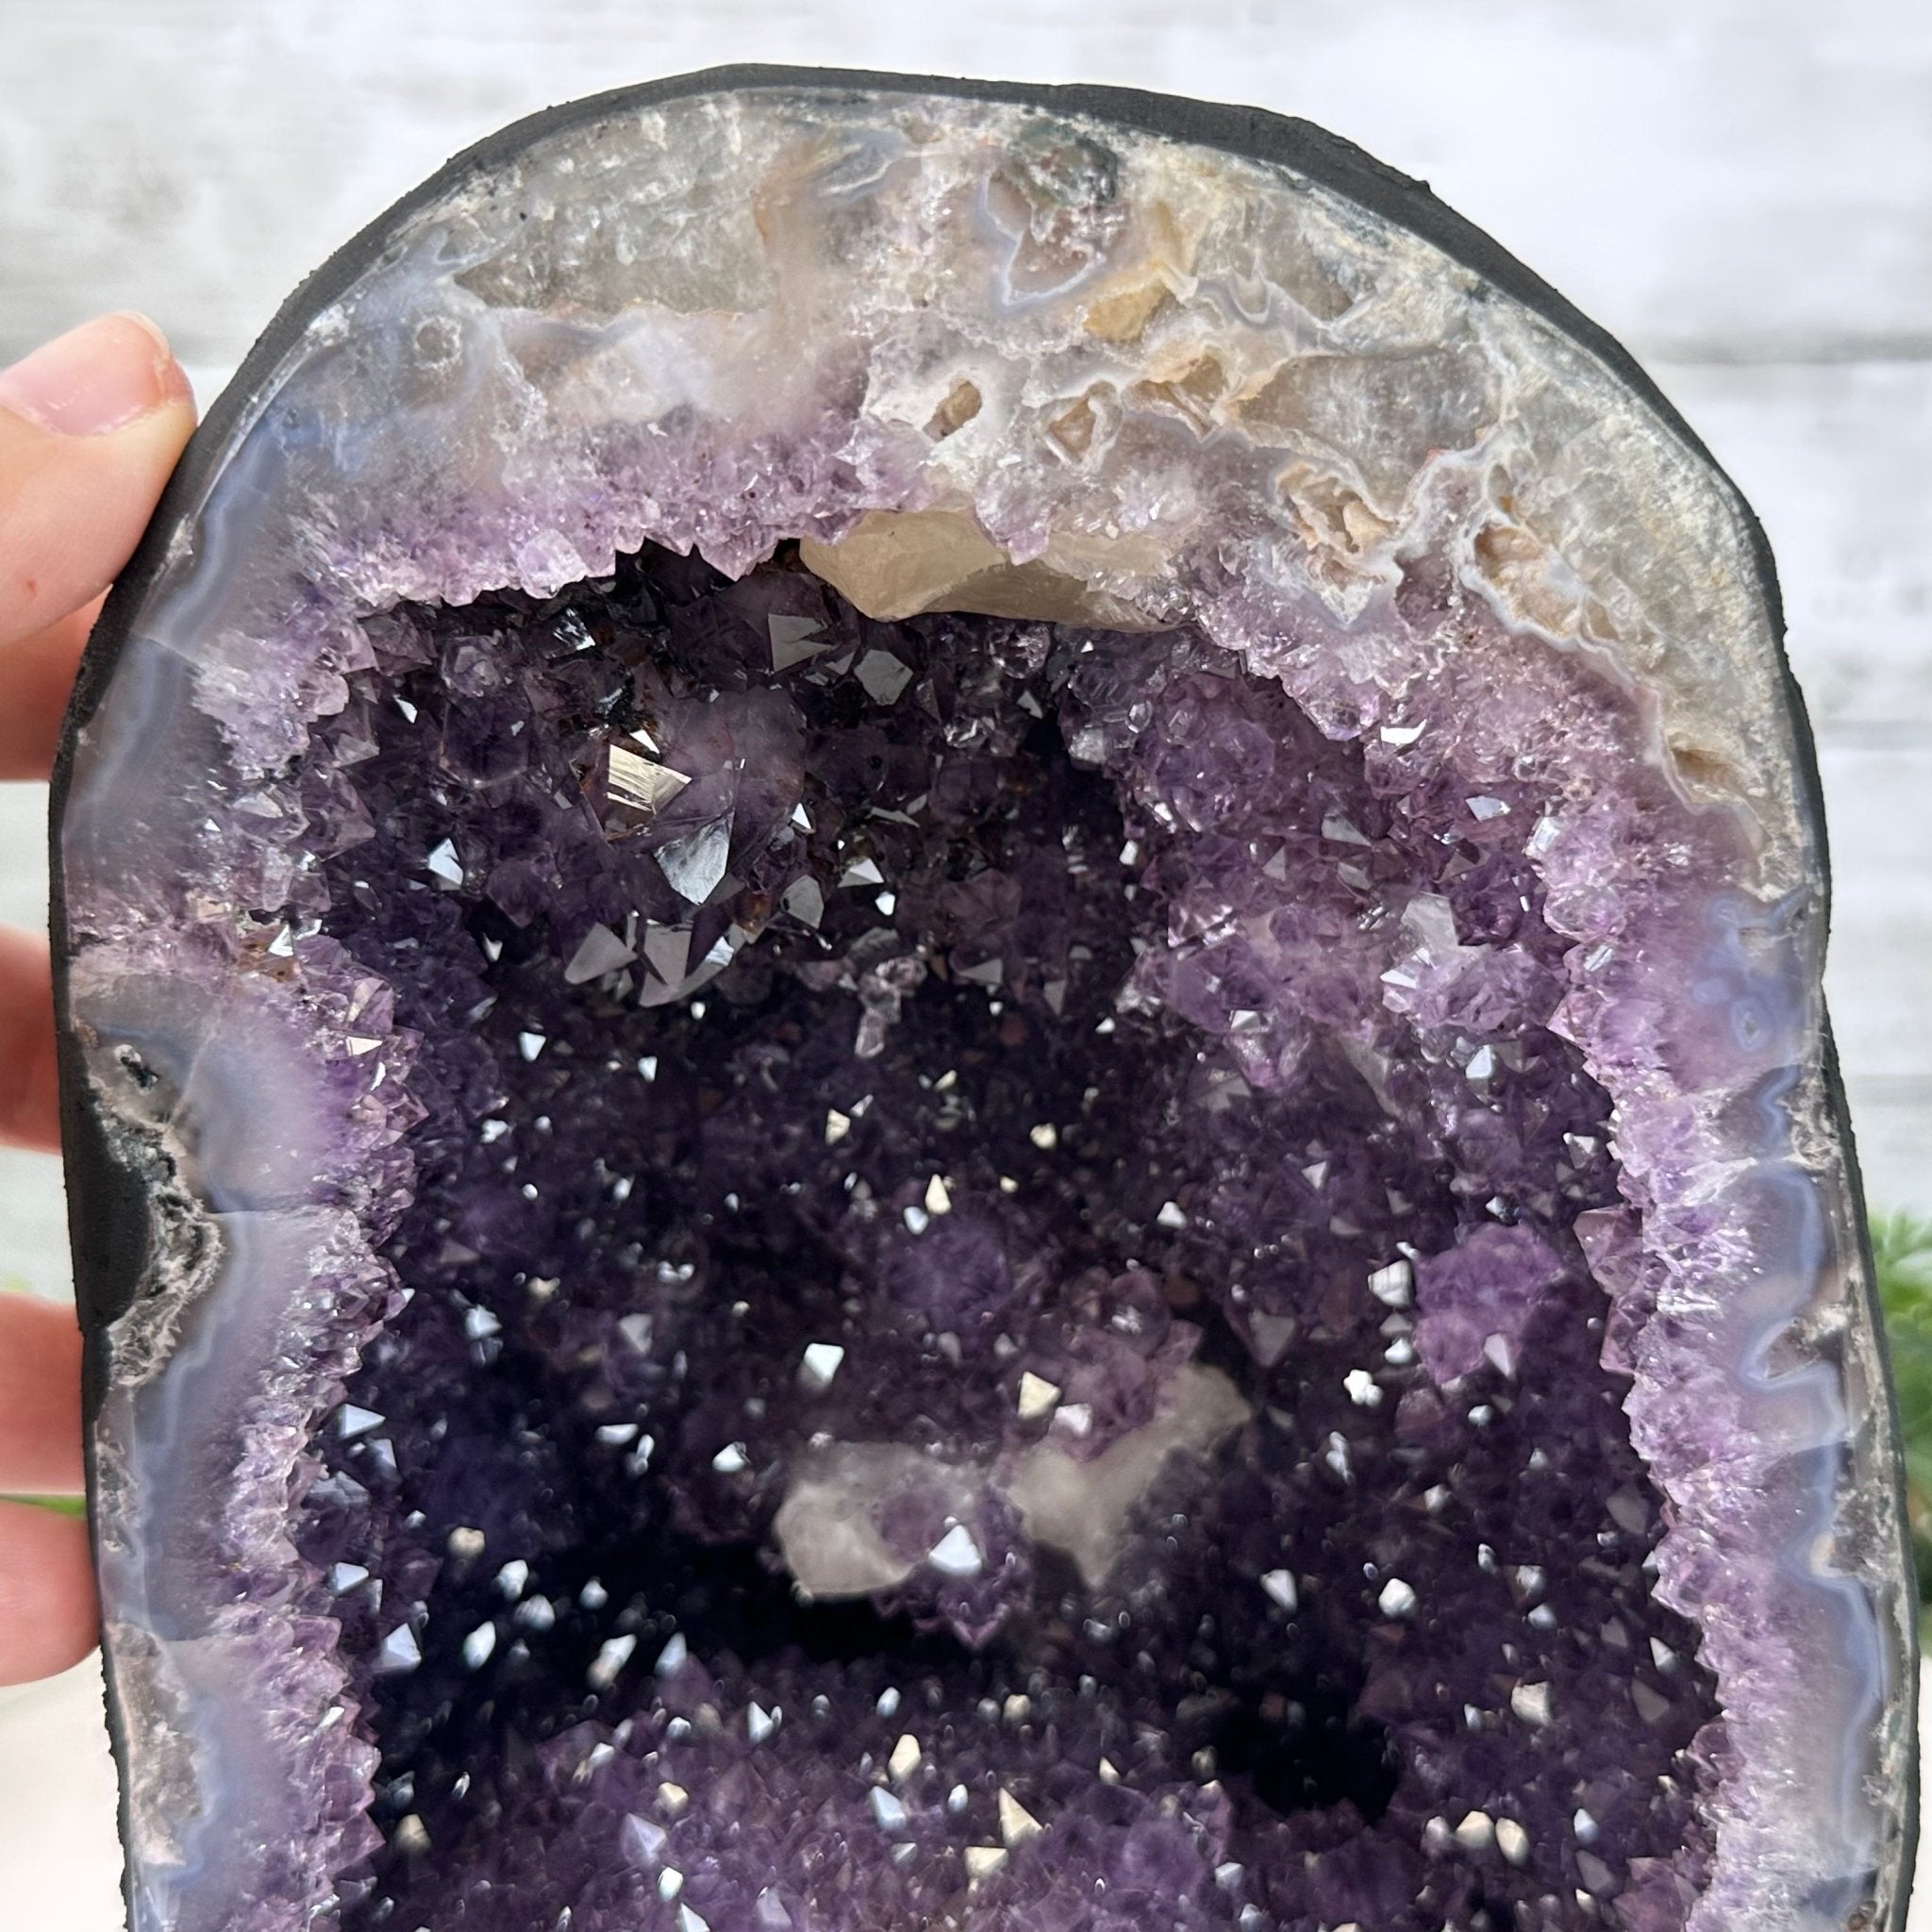 Extra Plus Quality Brazilian Amethyst Cathedral, 9.6 lbs & 8.5" Tall, Model #5601-0955 by Brazil Gems - Brazil GemsBrazil GemsExtra Plus Quality Brazilian Amethyst Cathedral, 9.6 lbs & 8.5" Tall, Model #5601-0955 by Brazil GemsCathedrals5601-0955